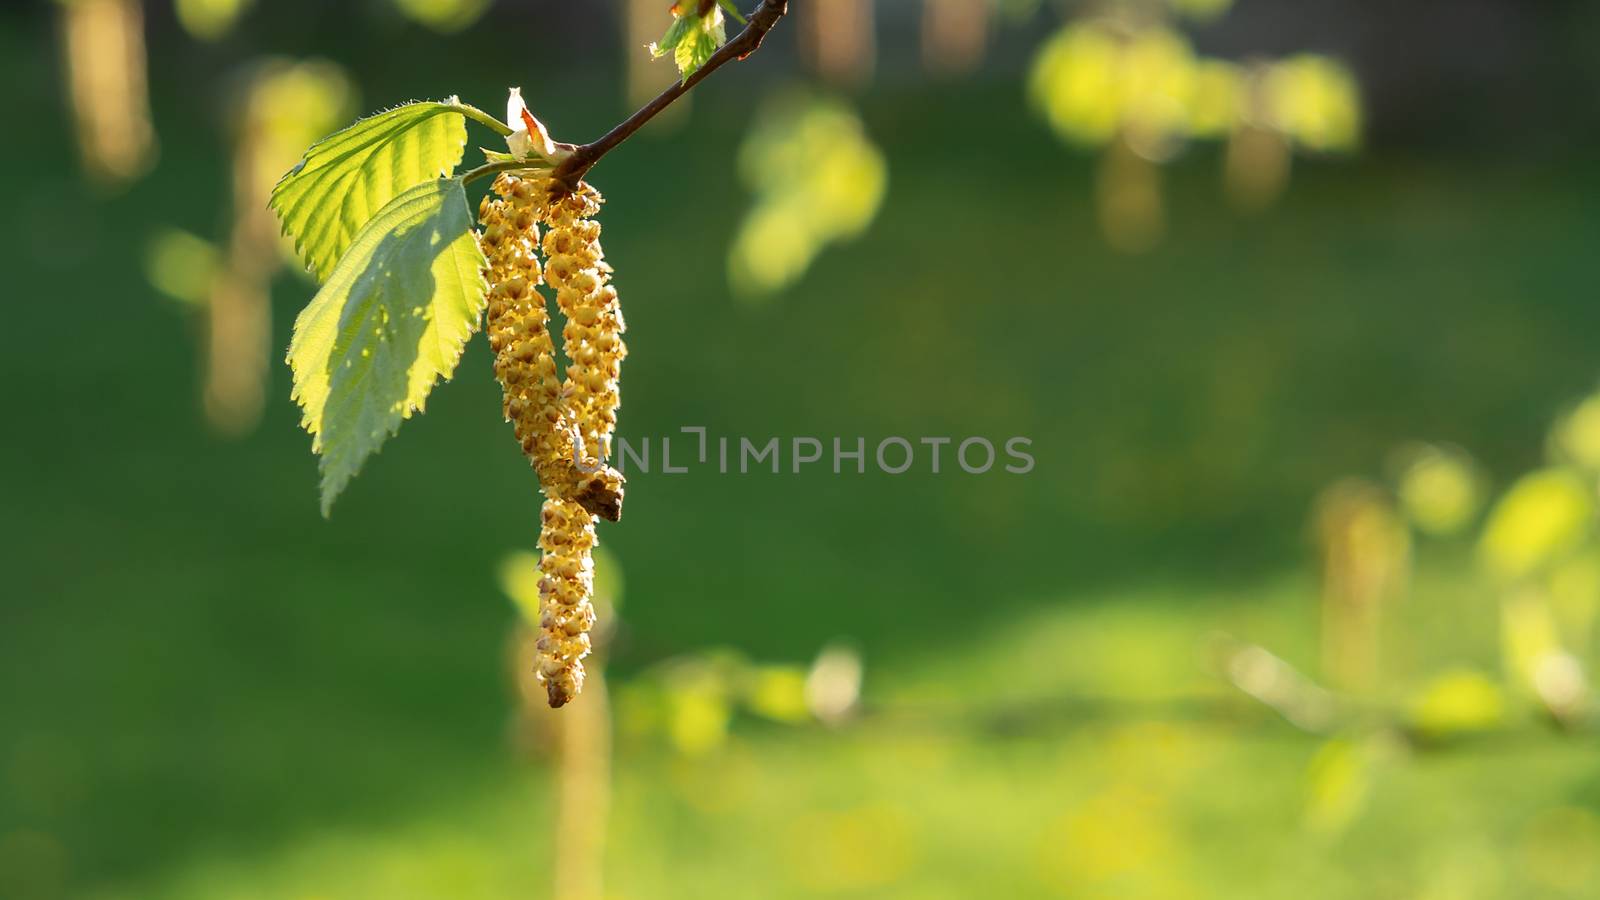 Birch catkins in spring park close-up, allergies to pollen of spring flowering plants concept by galsand